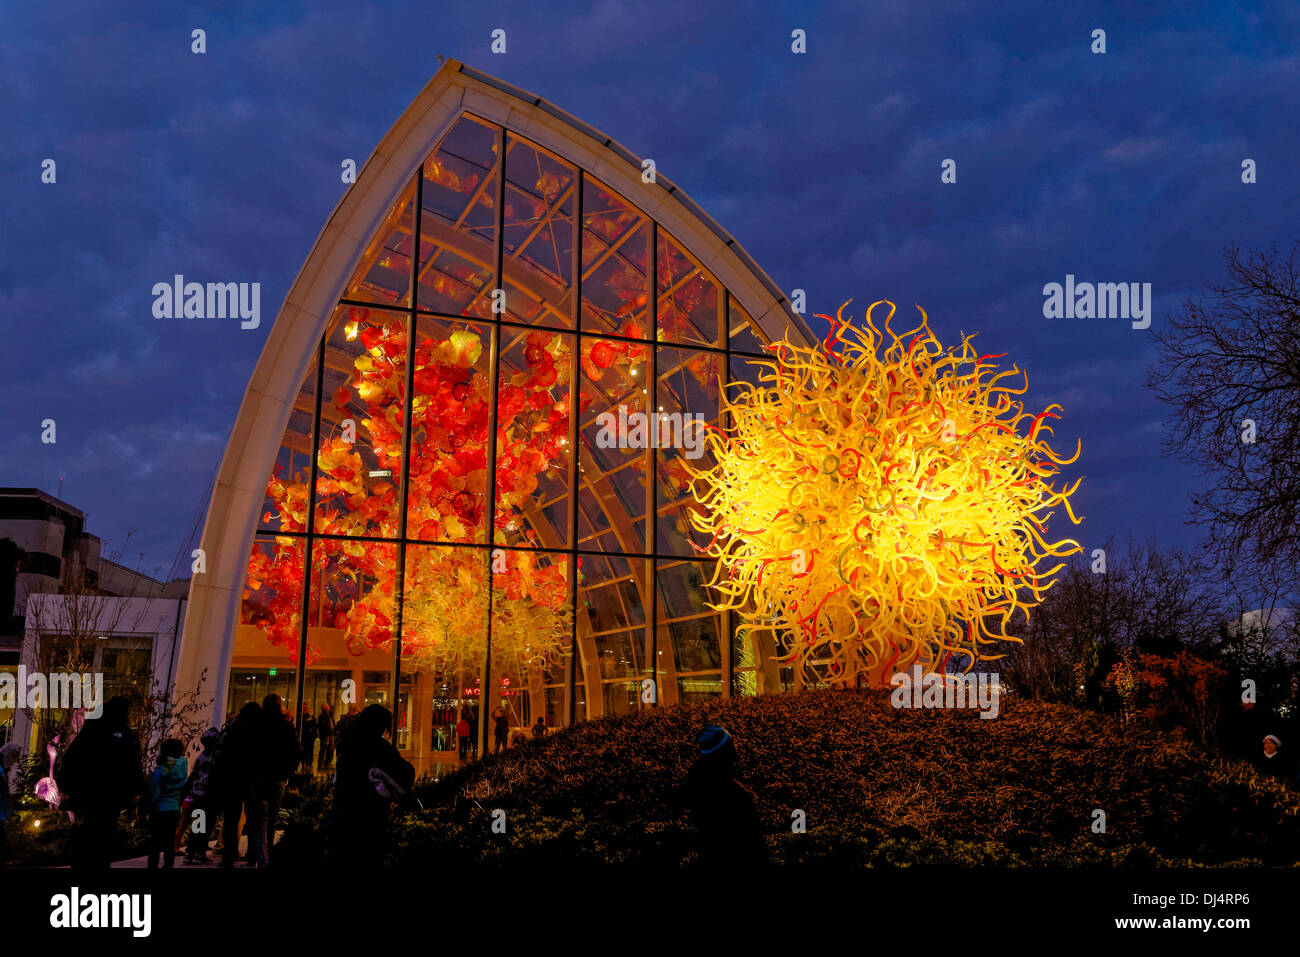 Glasshouse Chihuly Garden And Glass Seattle Washington State